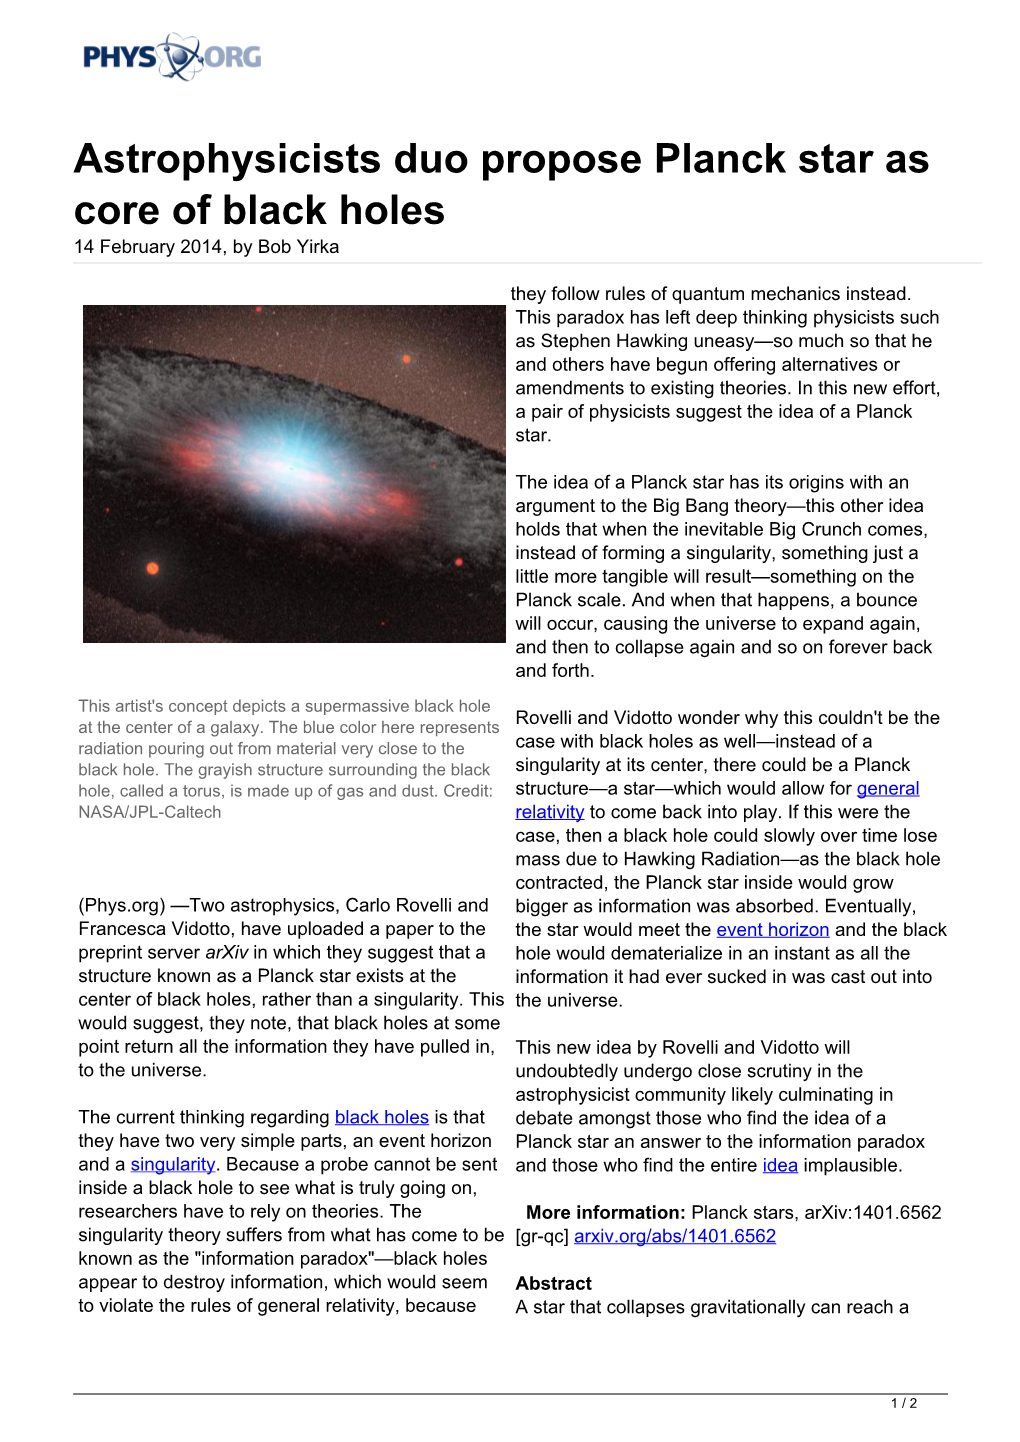 Astrophysicists Duo Propose Planck Star As Core of Black Holes 14 February 2014, by Bob Yirka